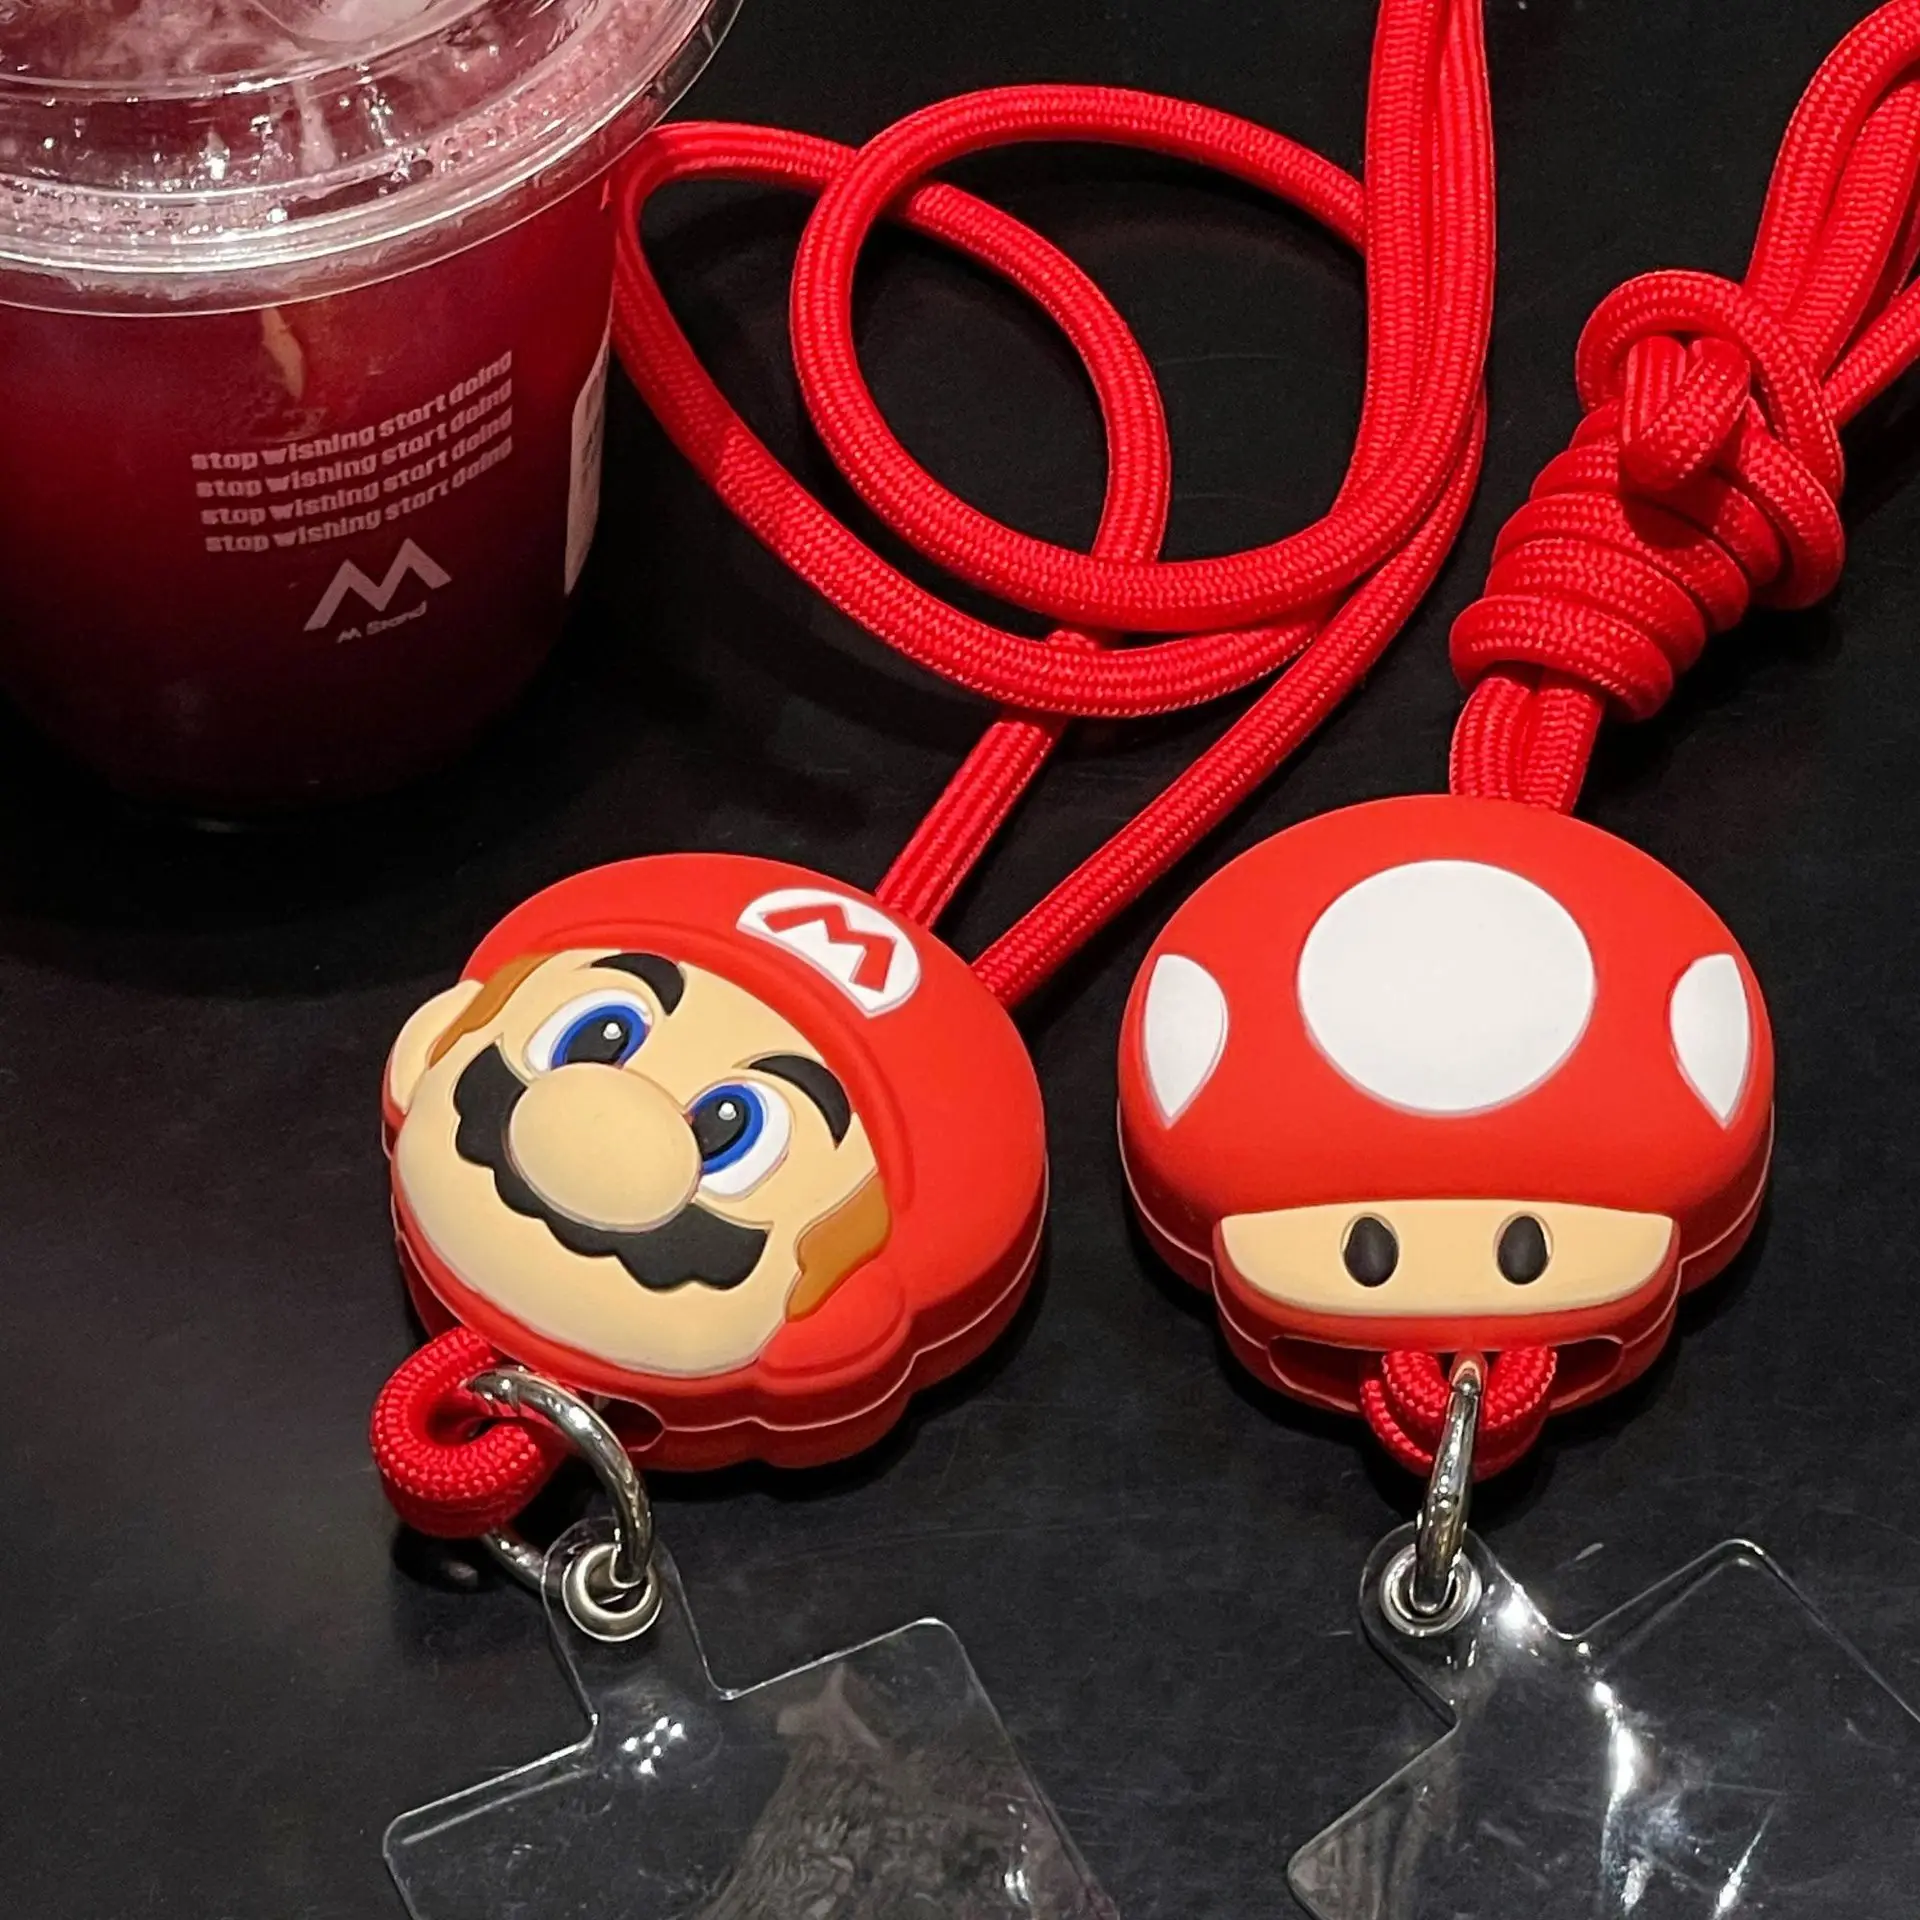 

Mario's Funny Cartoon Phone Case Lanyard Mario Bros. Toad Stereoscopic Silicone ID Lanyard with Card To Protect Against Falls